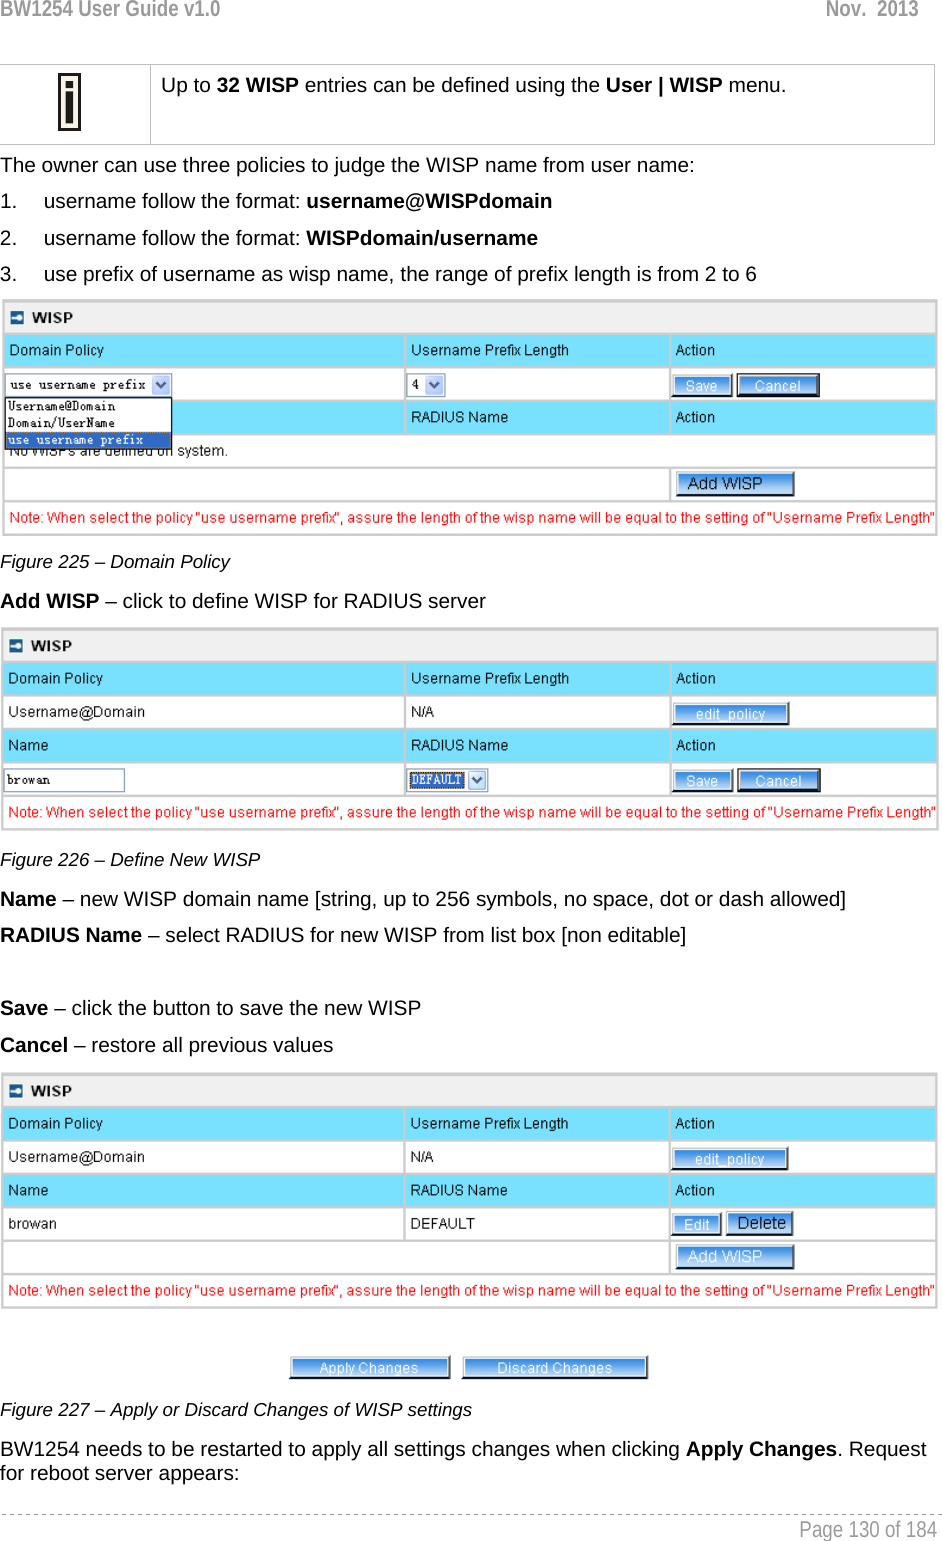 BW1254 User Guide v1.0  Nov.  2013     Page 130 of 184    Up to 32 WISP entries can be defined using the User | WISP menu. The owner can use three policies to judge the WISP name from user name: 1.  username follow the format: username@WISPdomain 2.  username follow the format: WISPdomain/username 3.  use prefix of username as wisp name, the range of prefix length is from 2 to 6  Figure 225 – Domain Policy Add WISP – click to define WISP for RADIUS server  Figure 226 – Define New WISP Name – new WISP domain name [string, up to 256 symbols, no space, dot or dash allowed] RADIUS Name – select RADIUS for new WISP from list box [non editable]  Save – click the button to save the new WISP Cancel – restore all previous values  Figure 227 – Apply or Discard Changes of WISP settings BW1254 needs to be restarted to apply all settings changes when clicking Apply Changes. Request for reboot server appears: 